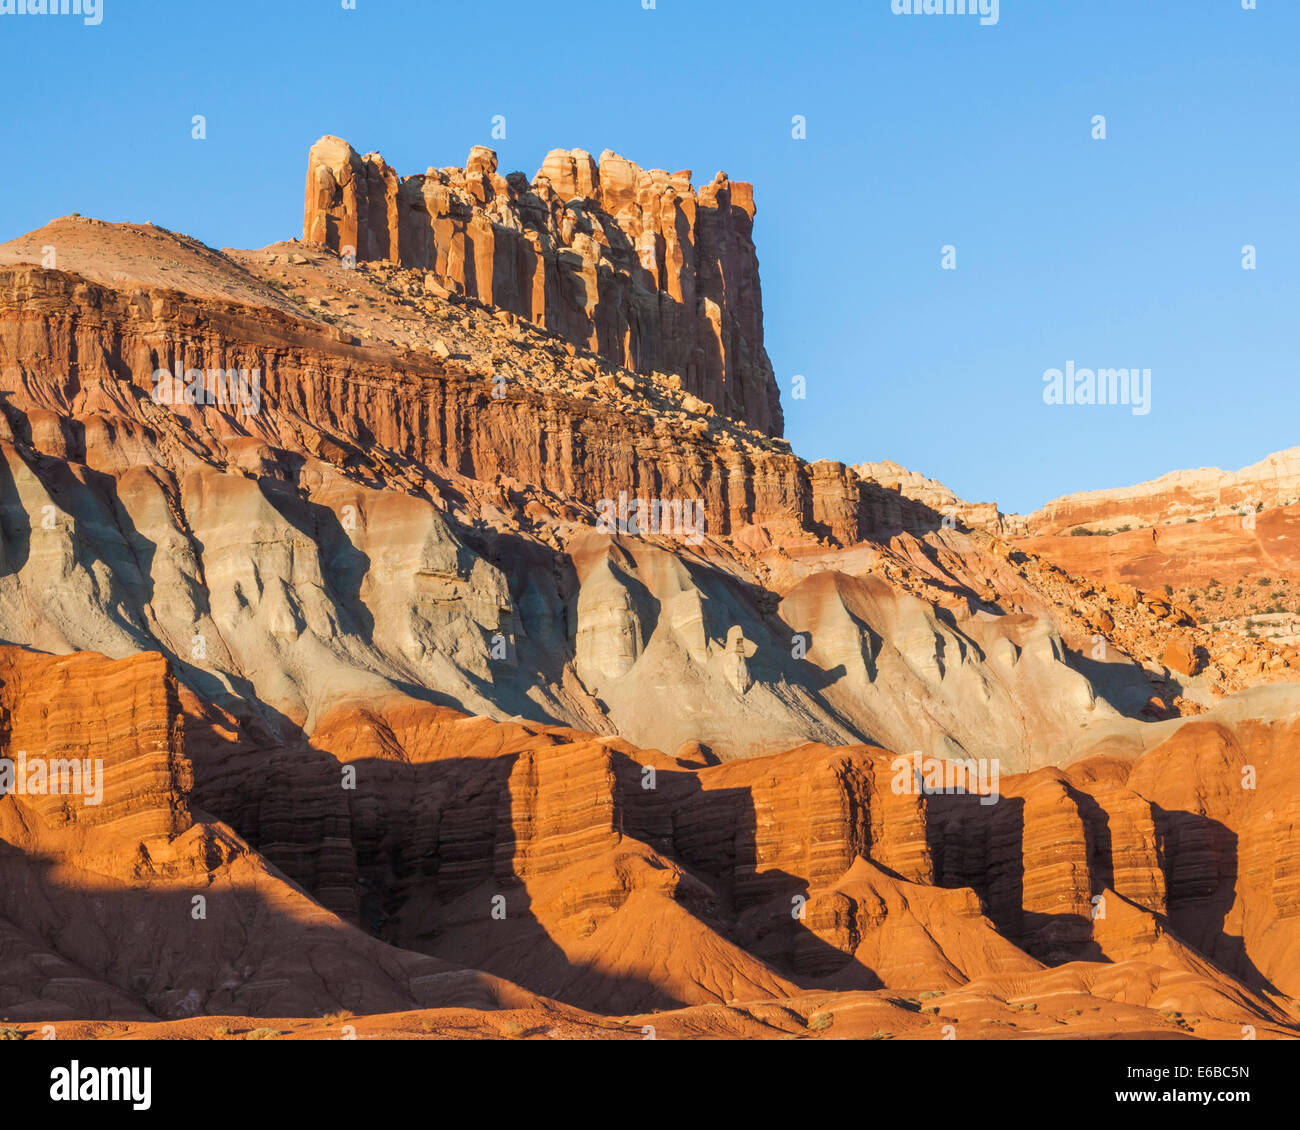 USA, Utah, Torrey, Capitol Reef National Park, The Castle consists of craggy, tall cliffs of Wingate Sandstone Stock Photo